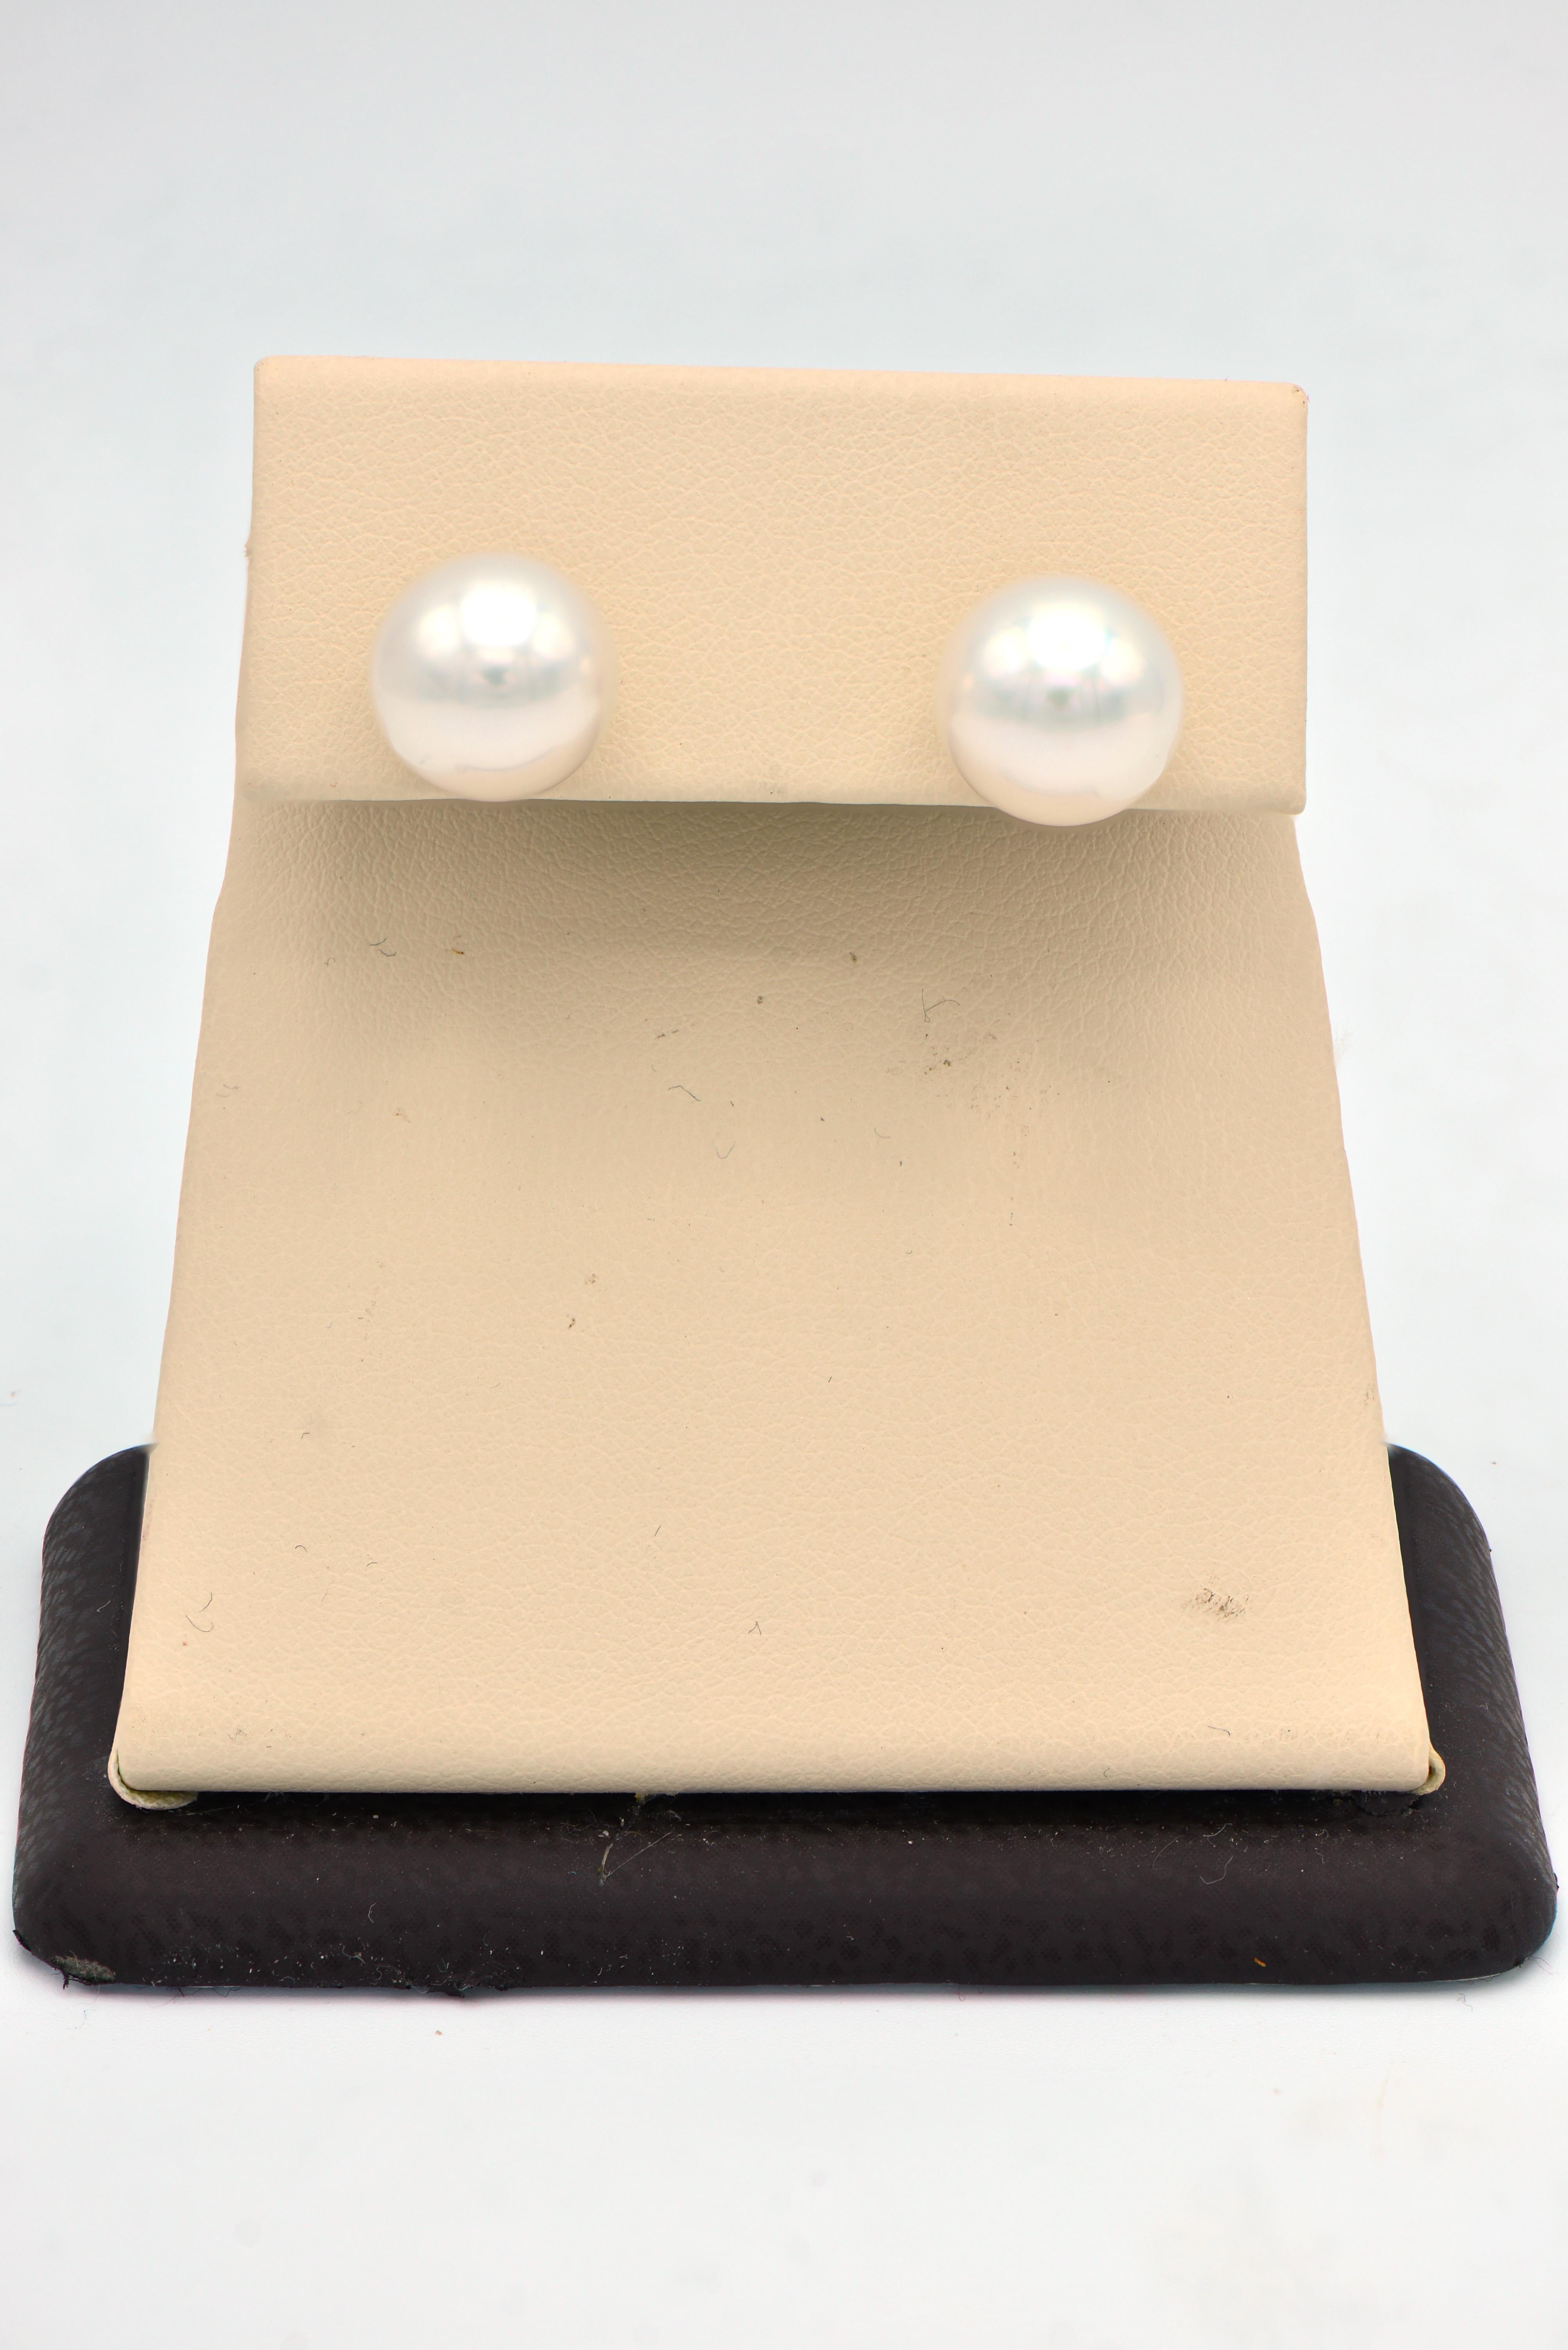 Contemporary South Sea Pearl Stud Earrings with 14 Karat White Gold Posts and Backs For Sale